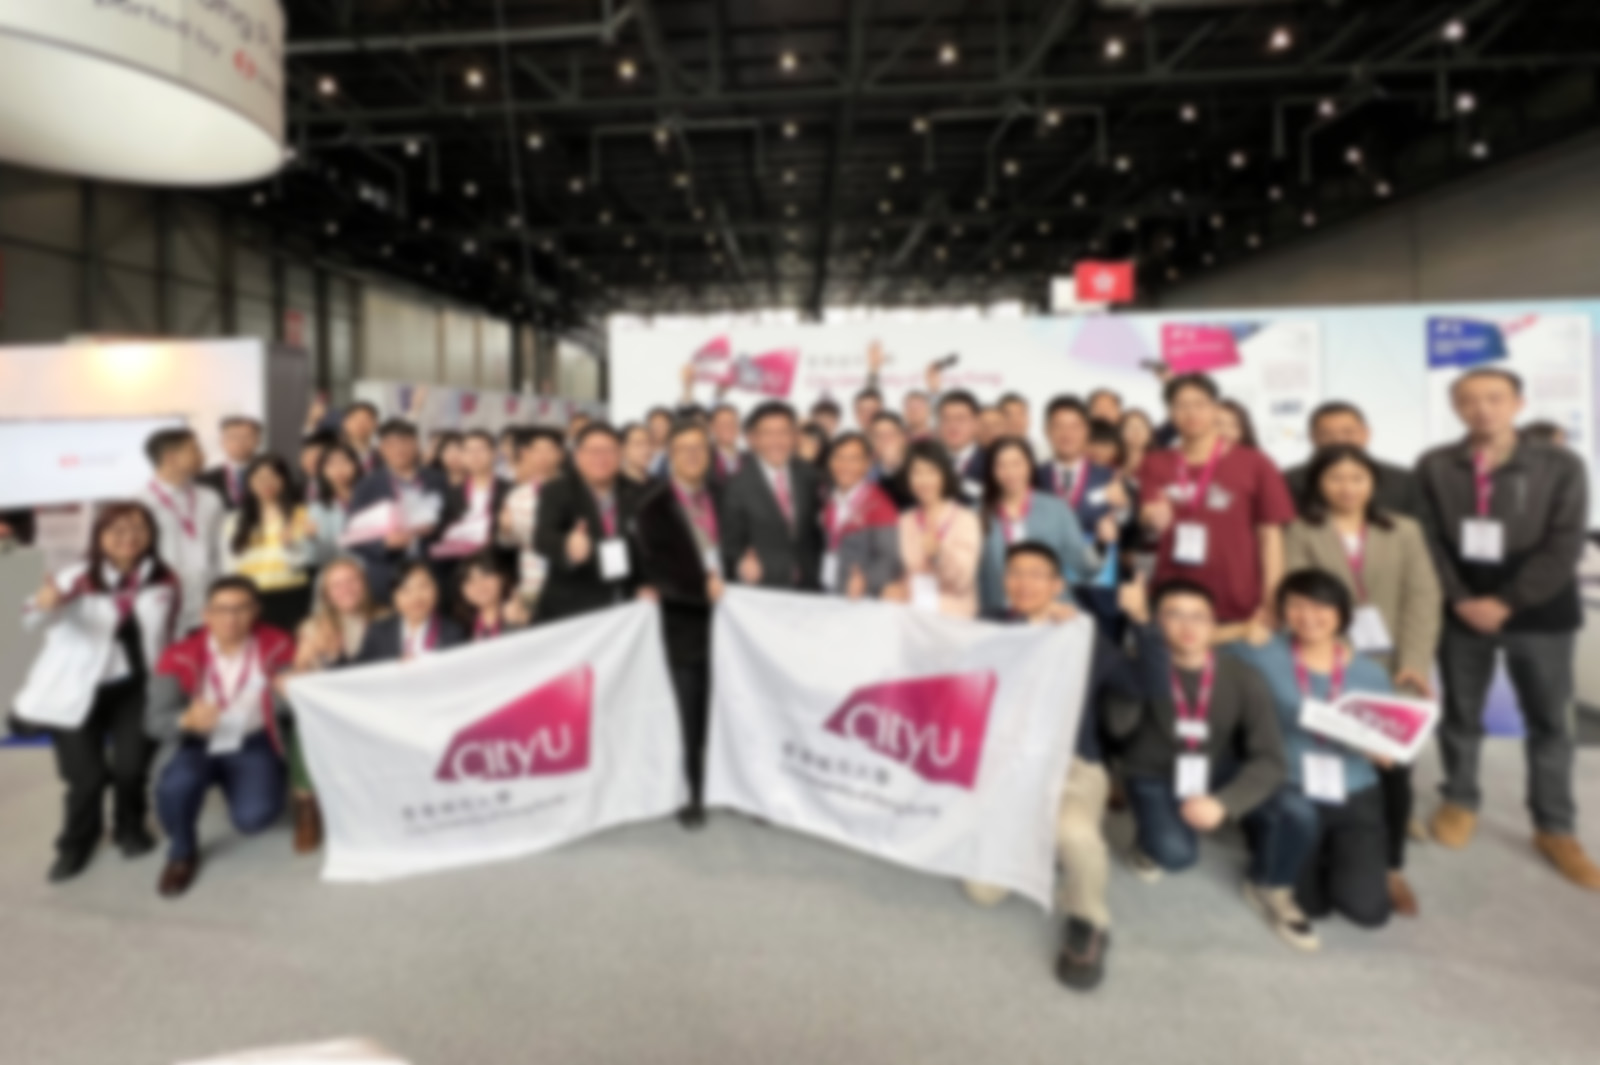 CityU’s record-breaking showing at International Exhibition of Inventions Geneva